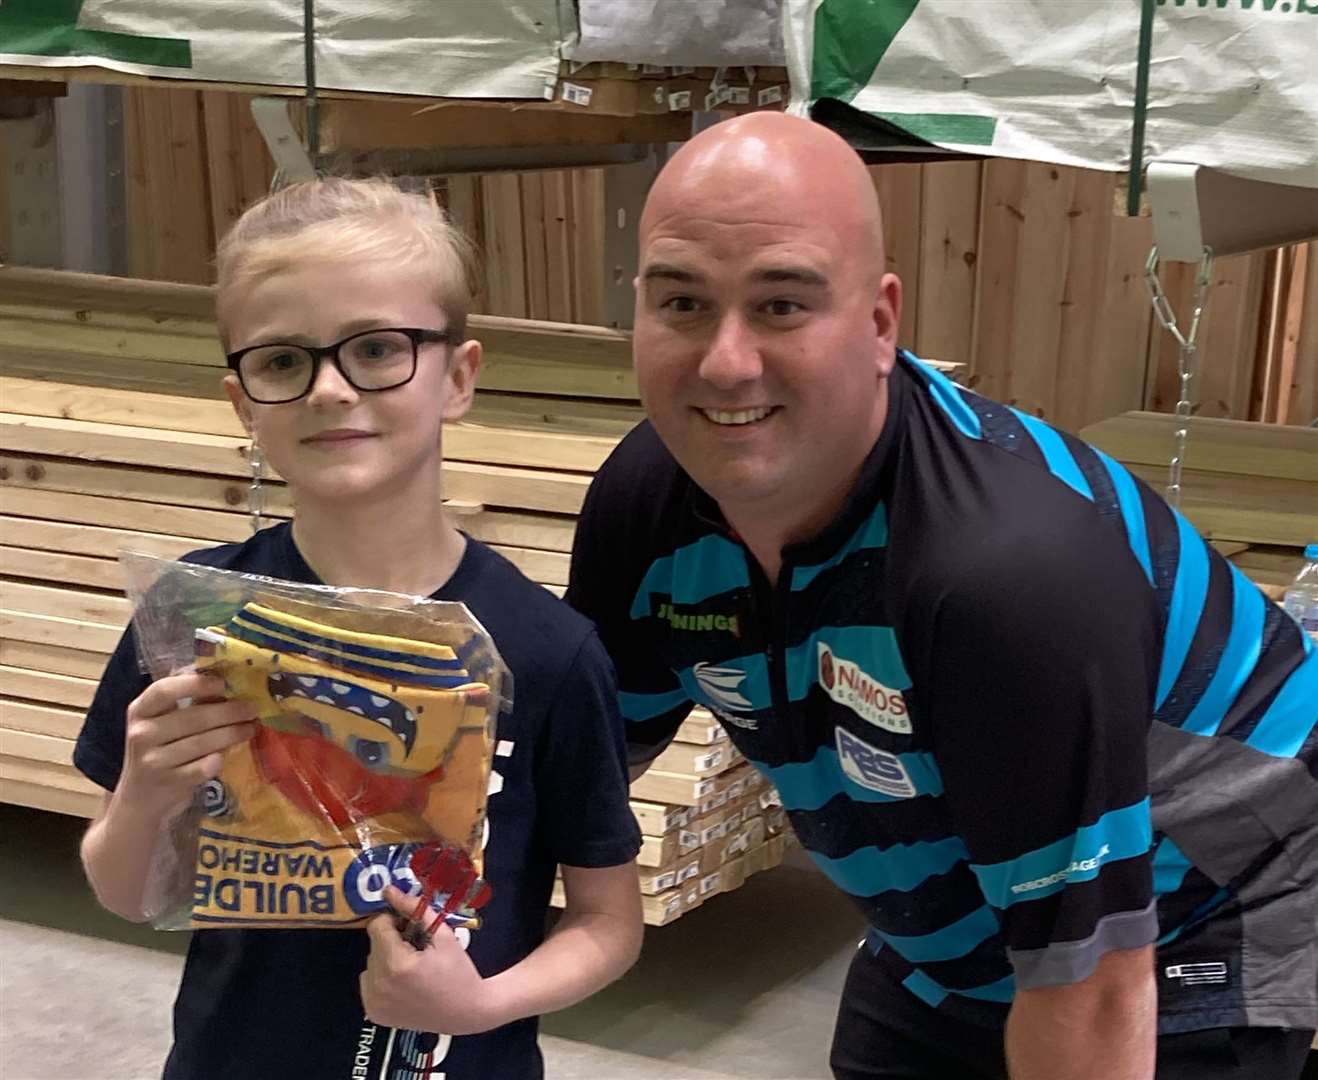 Young Drake Porter impressed world champion Rob Cross with his throwing